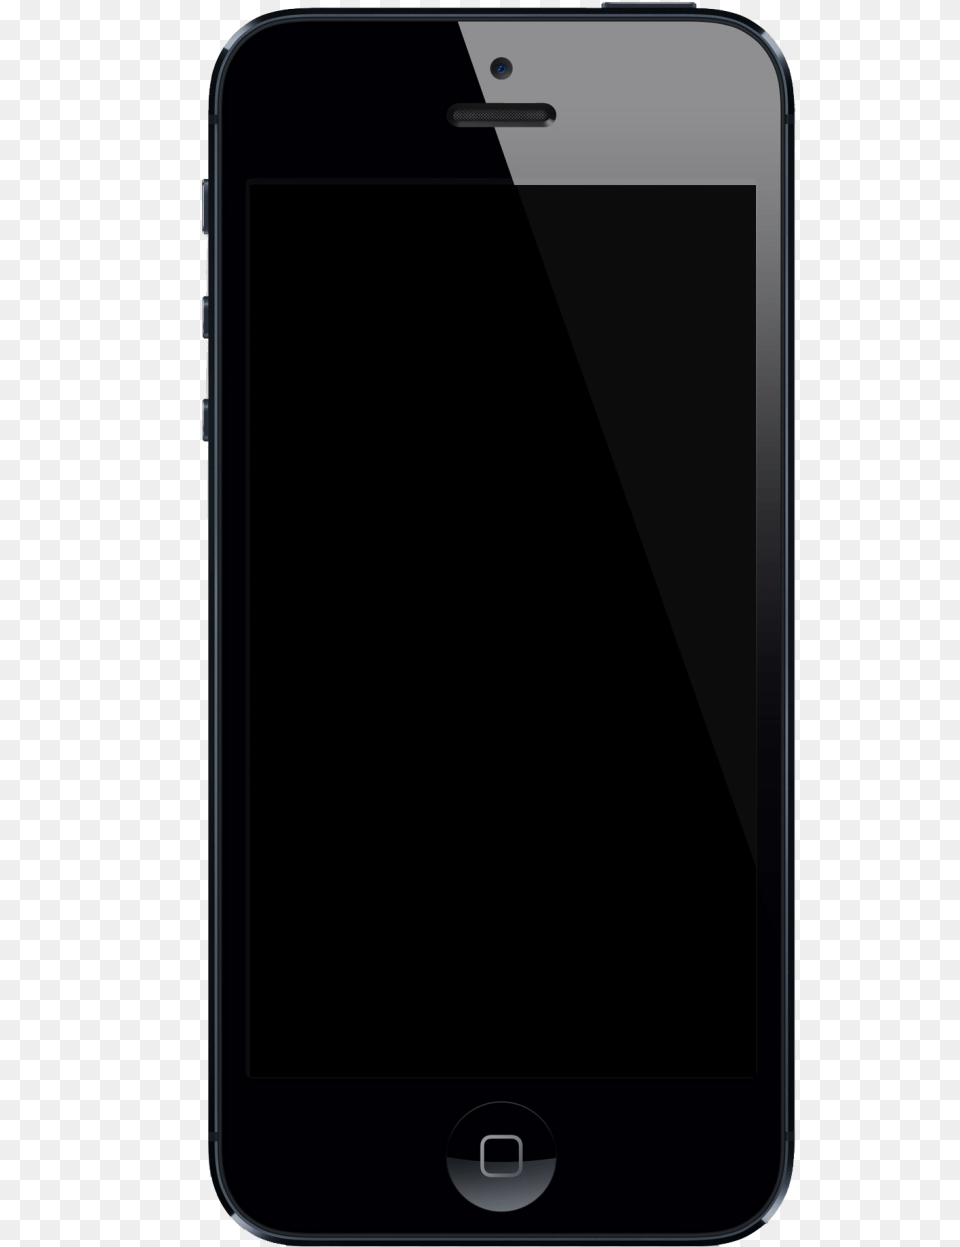 Blank Iphone Screen Transparent Iphone 5 With A Black Screen, Electronics, Mobile Phone, Phone Free Png